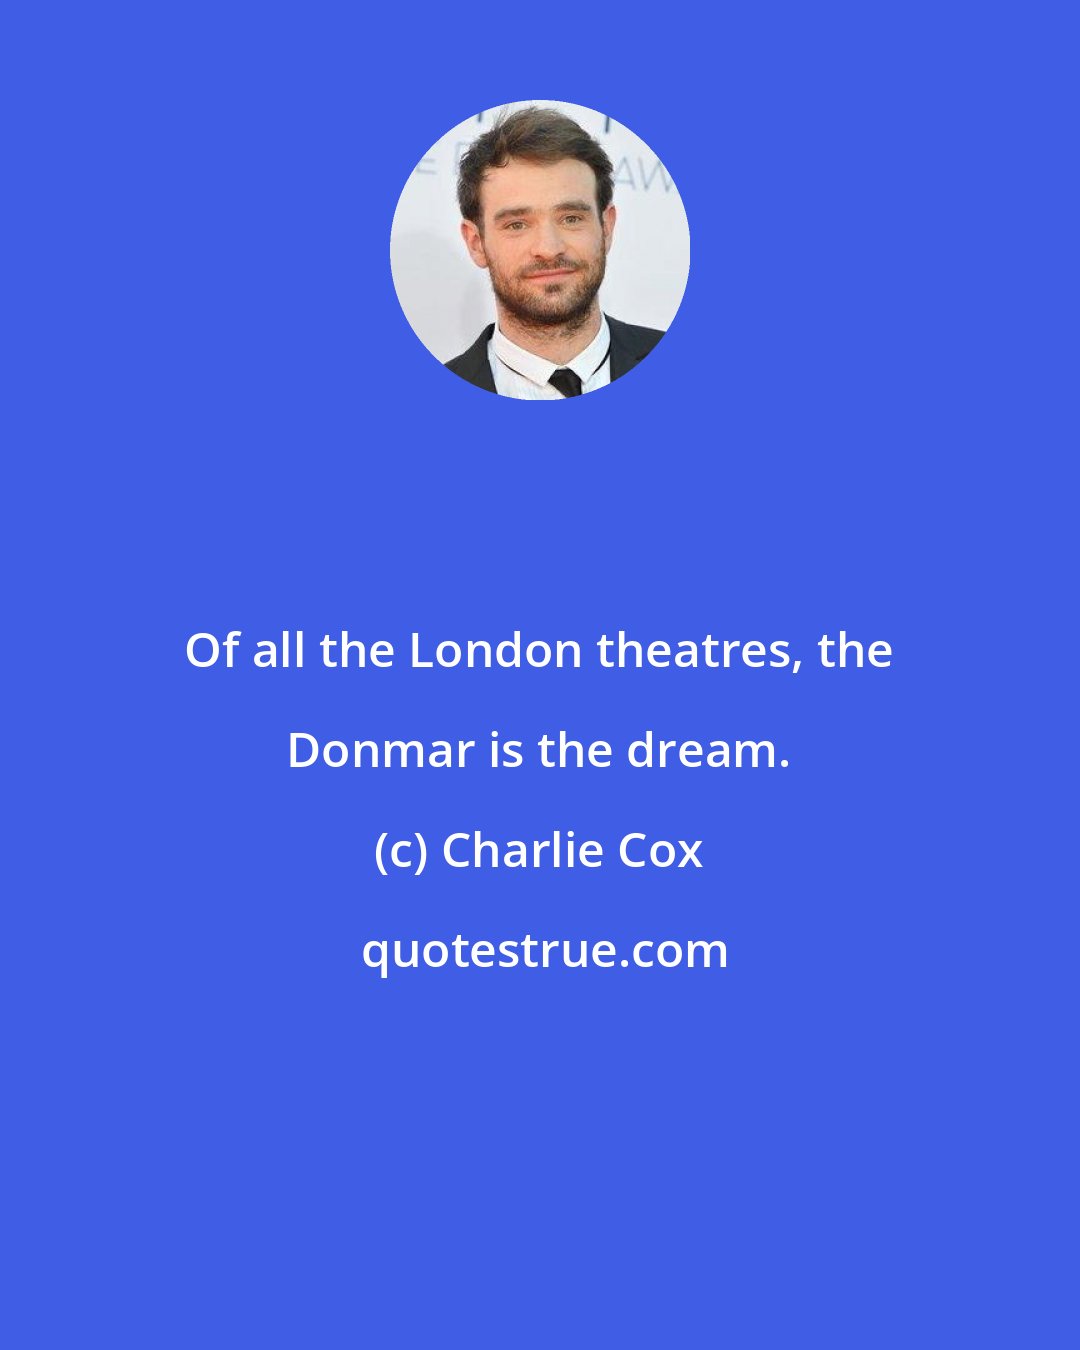 Charlie Cox: Of all the London theatres, the Donmar is the dream.